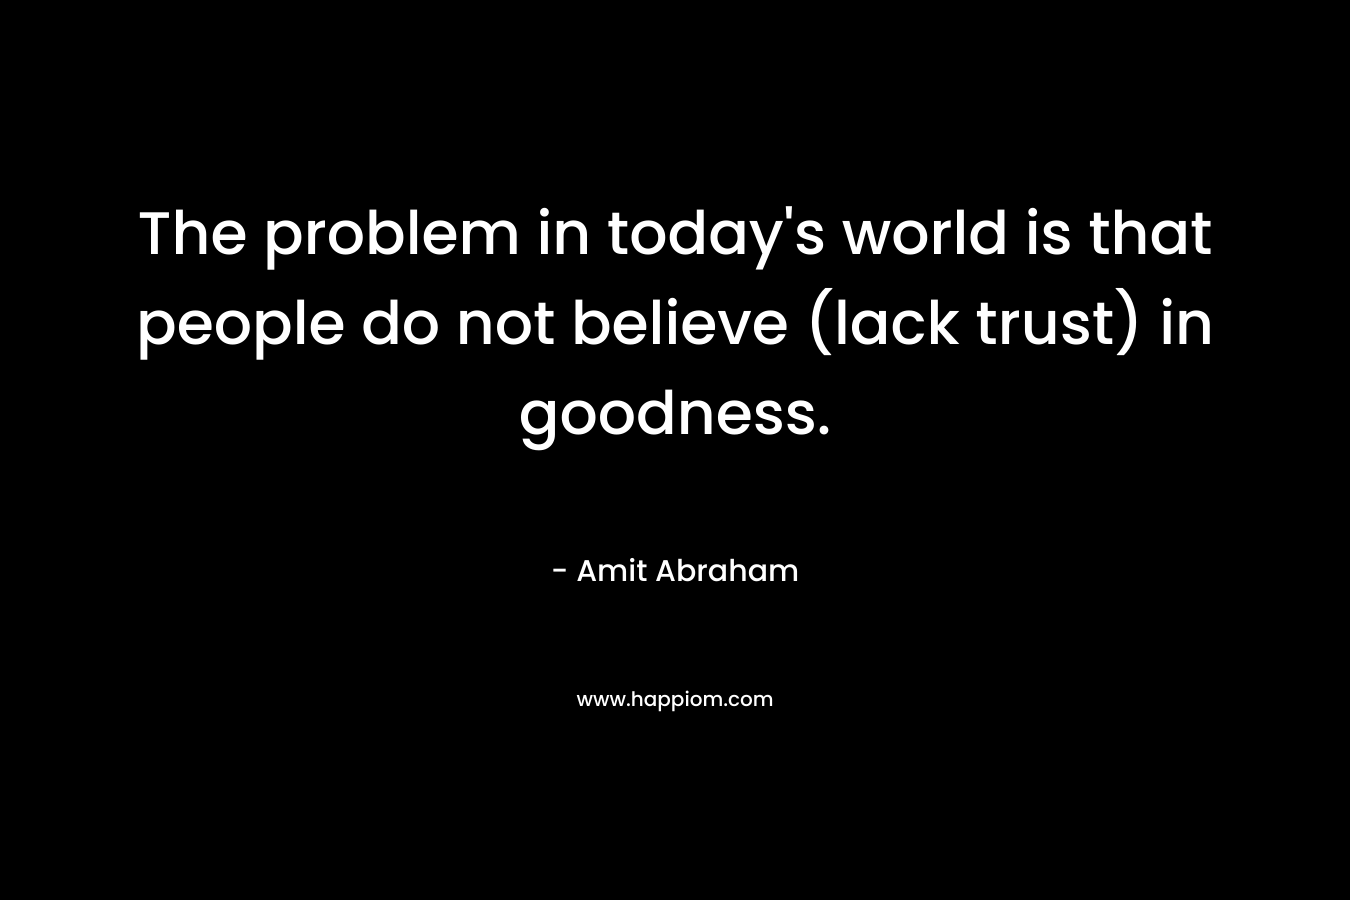 The problem in today’s world is that people do not believe (lack trust) in goodness. – Amit Abraham